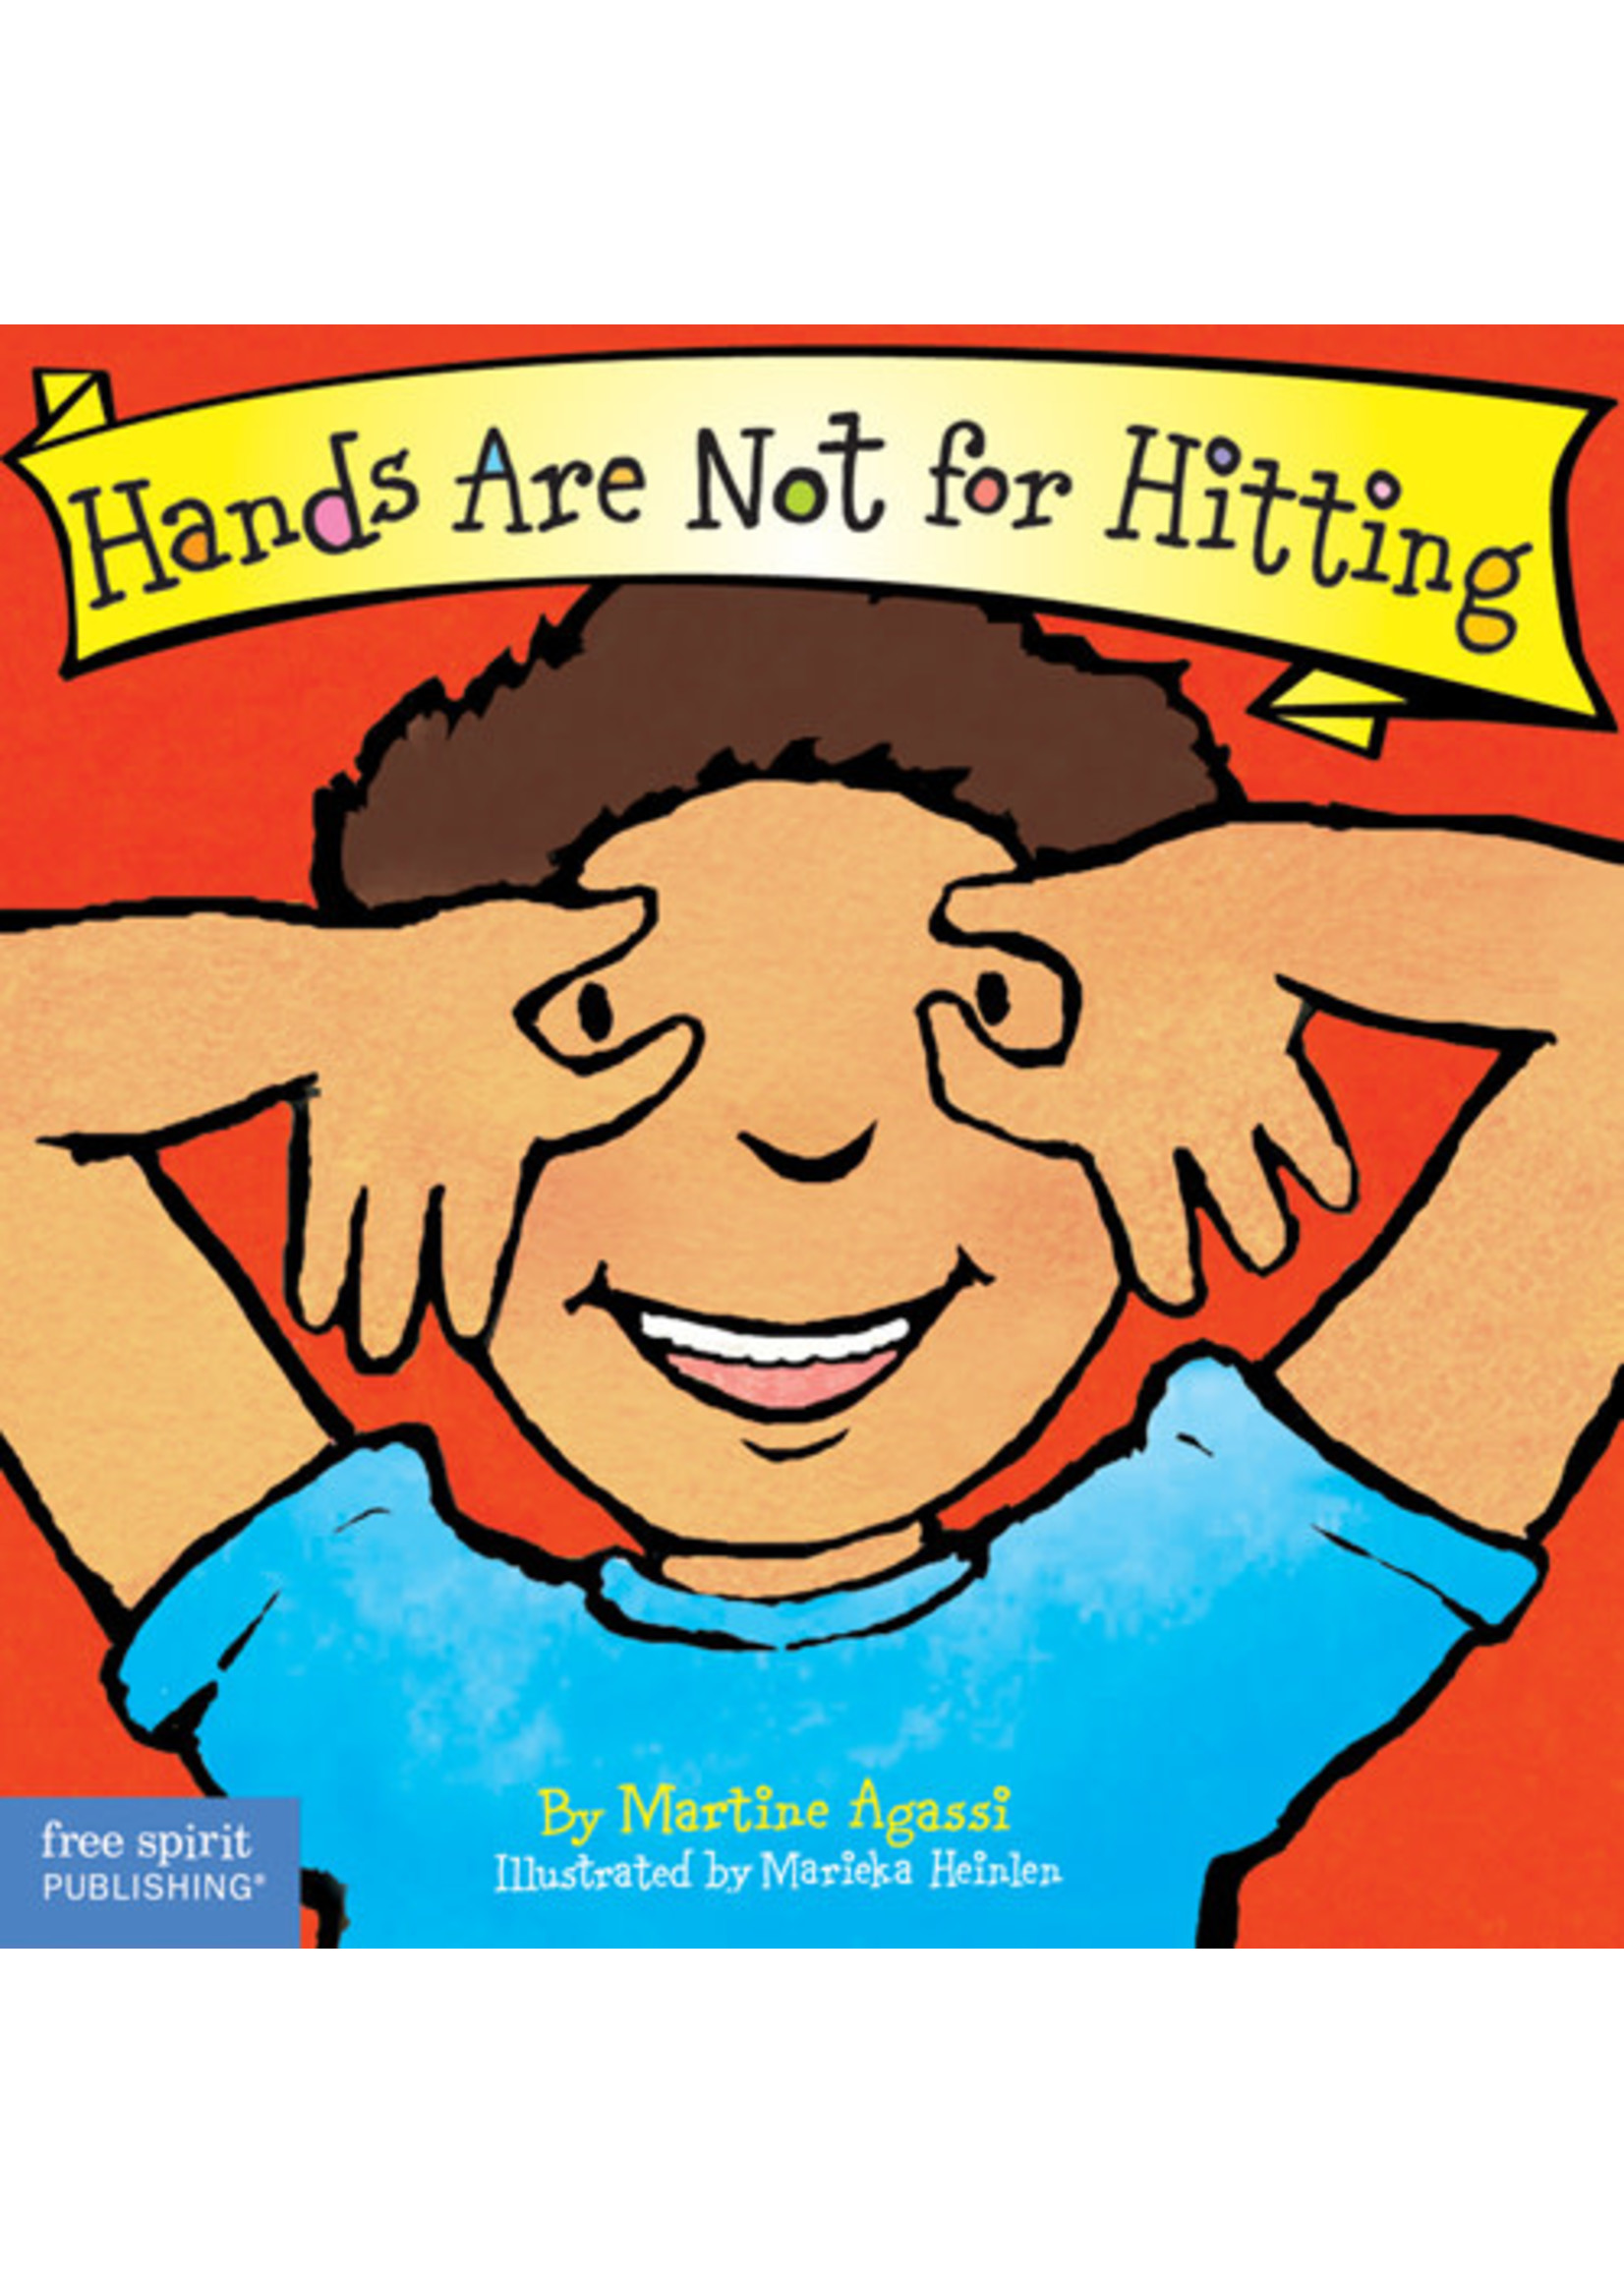 Hands Are Not for Hitting by Martine Agassi Ph.D., Marieka Heinlen